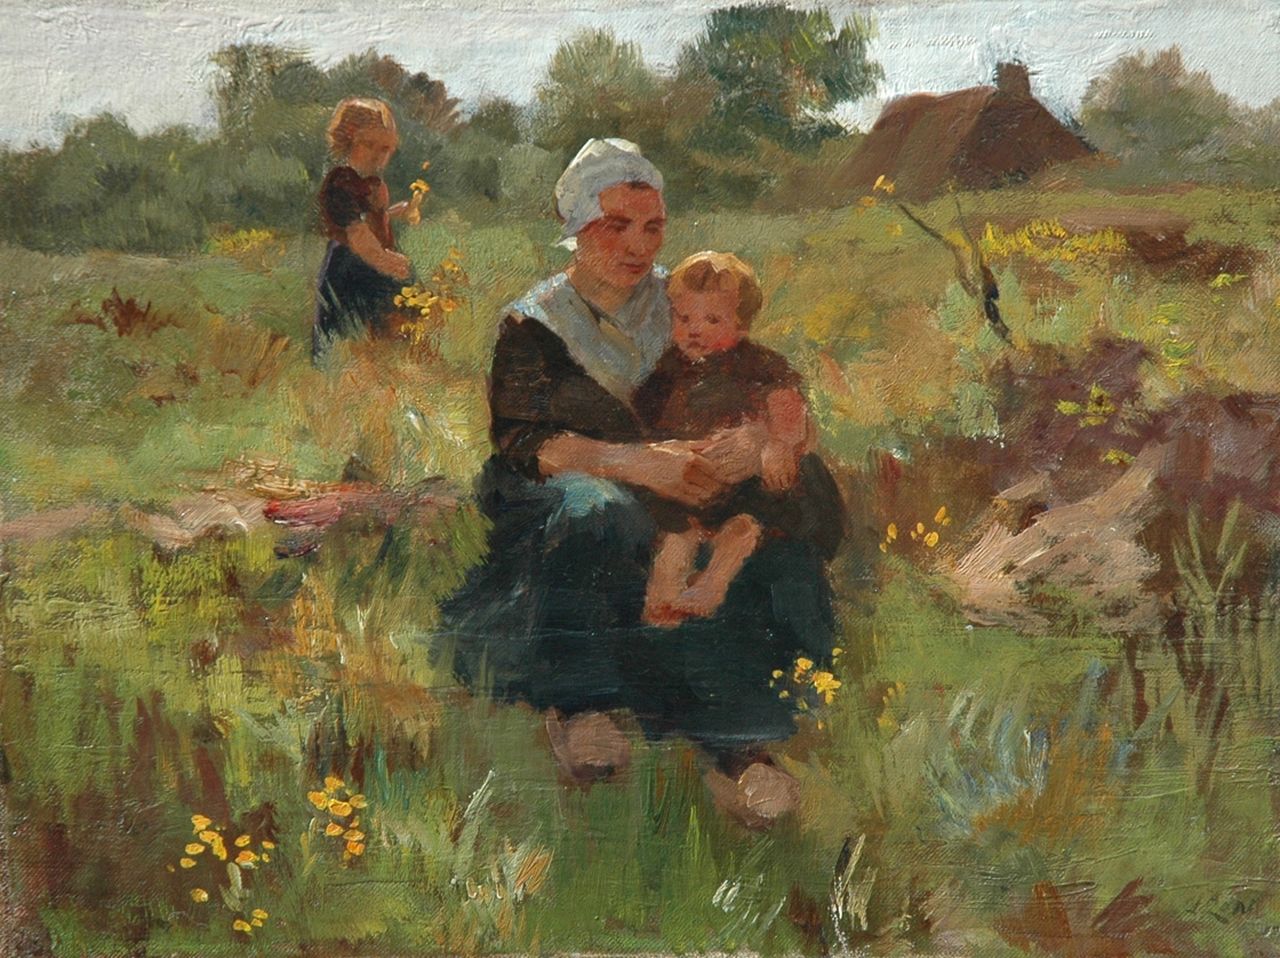 Jacques Zon | A summerday in the fields, Öl auf Leinwand auf Holz, 27,9 x 37,5 cm, signed l.r.